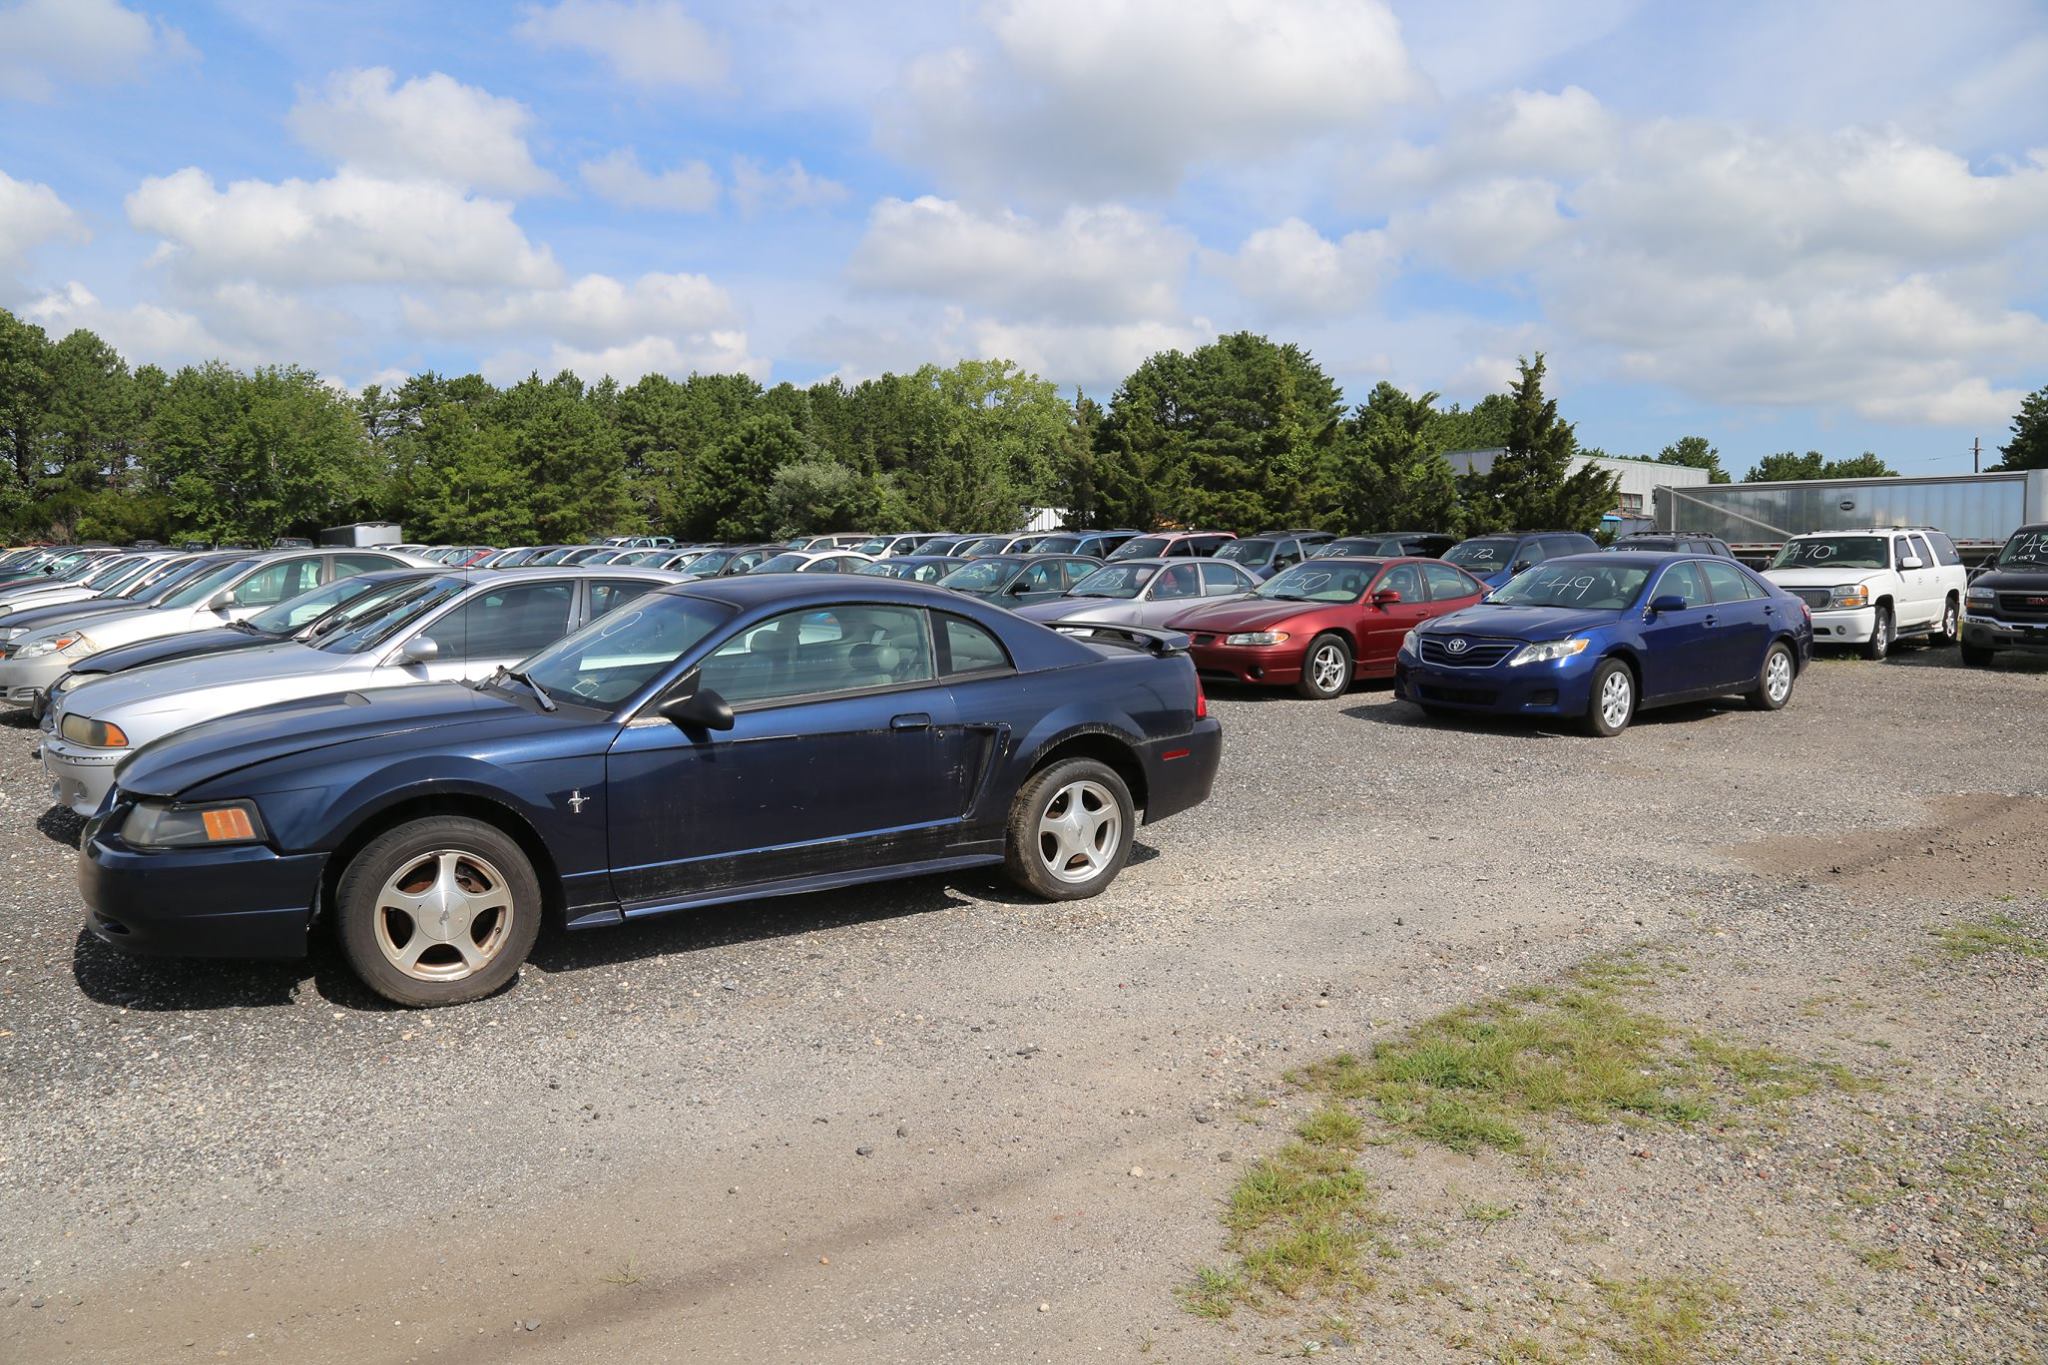 Suffolk County Police to hold vehicle auction June 25